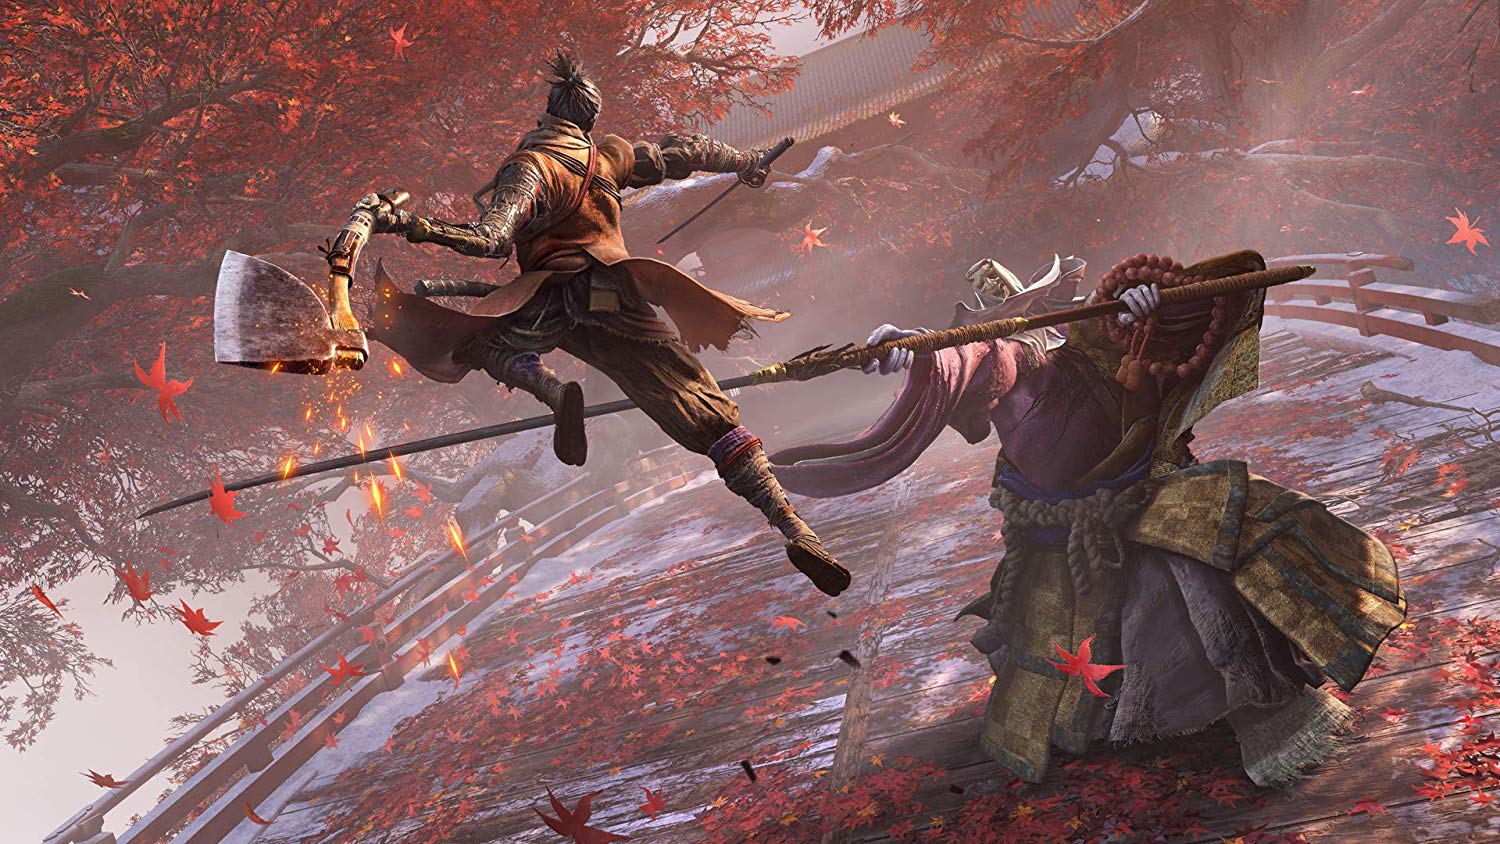 Sekiro: Shadows Die Twice - (PS4) PlayStation 4 Video Games Activision   